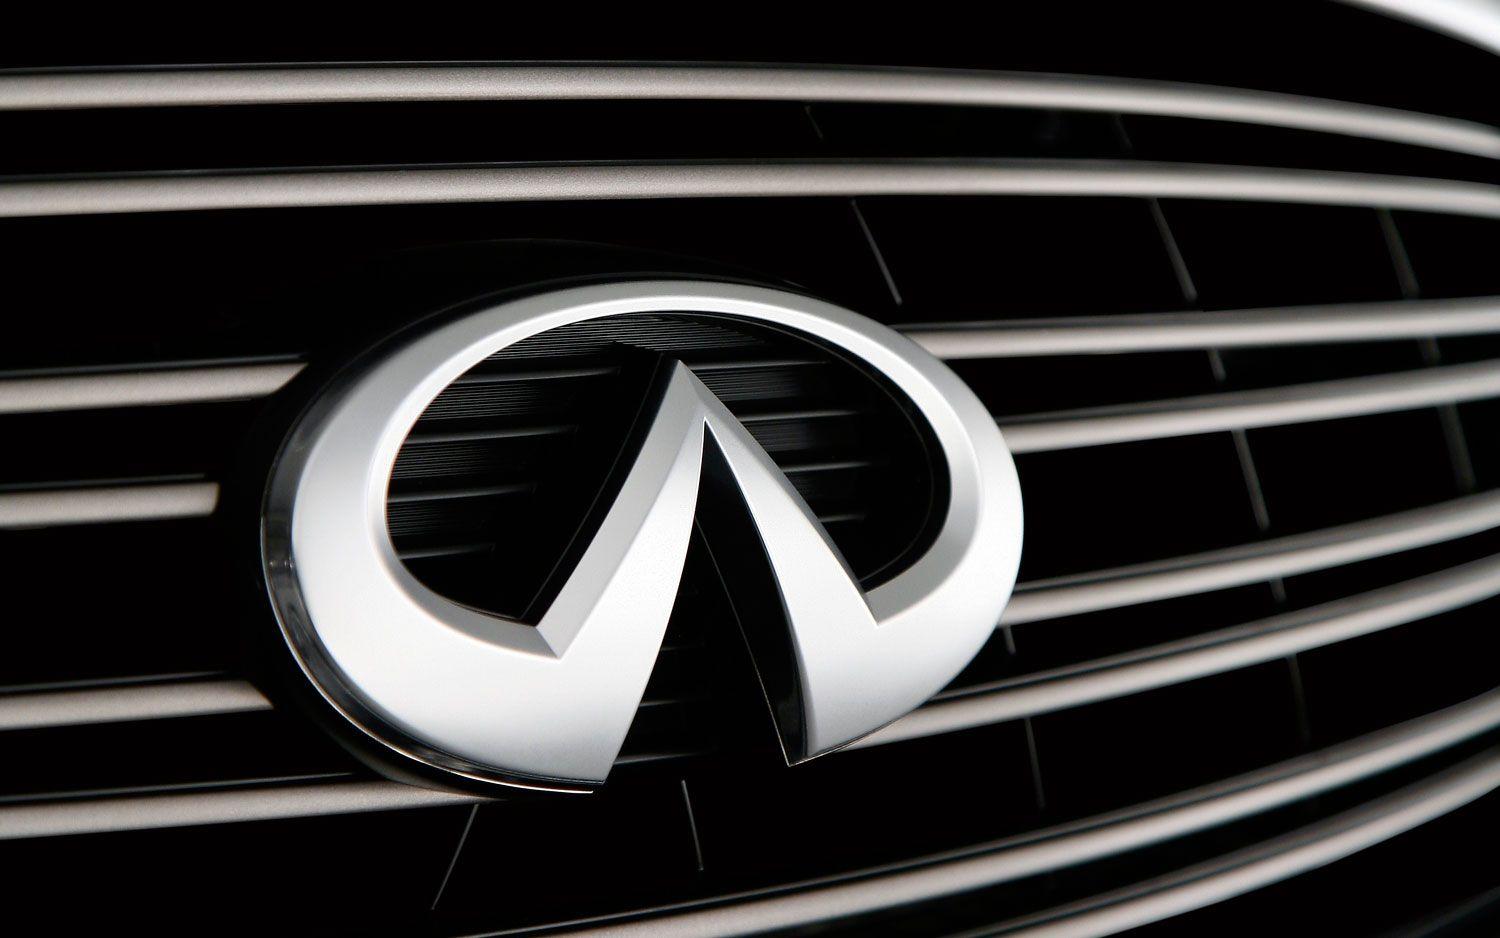 Infinity Car Logo - Infiniti Logo, Infiniti Car Symbol Meaning and History | Car Brand ...